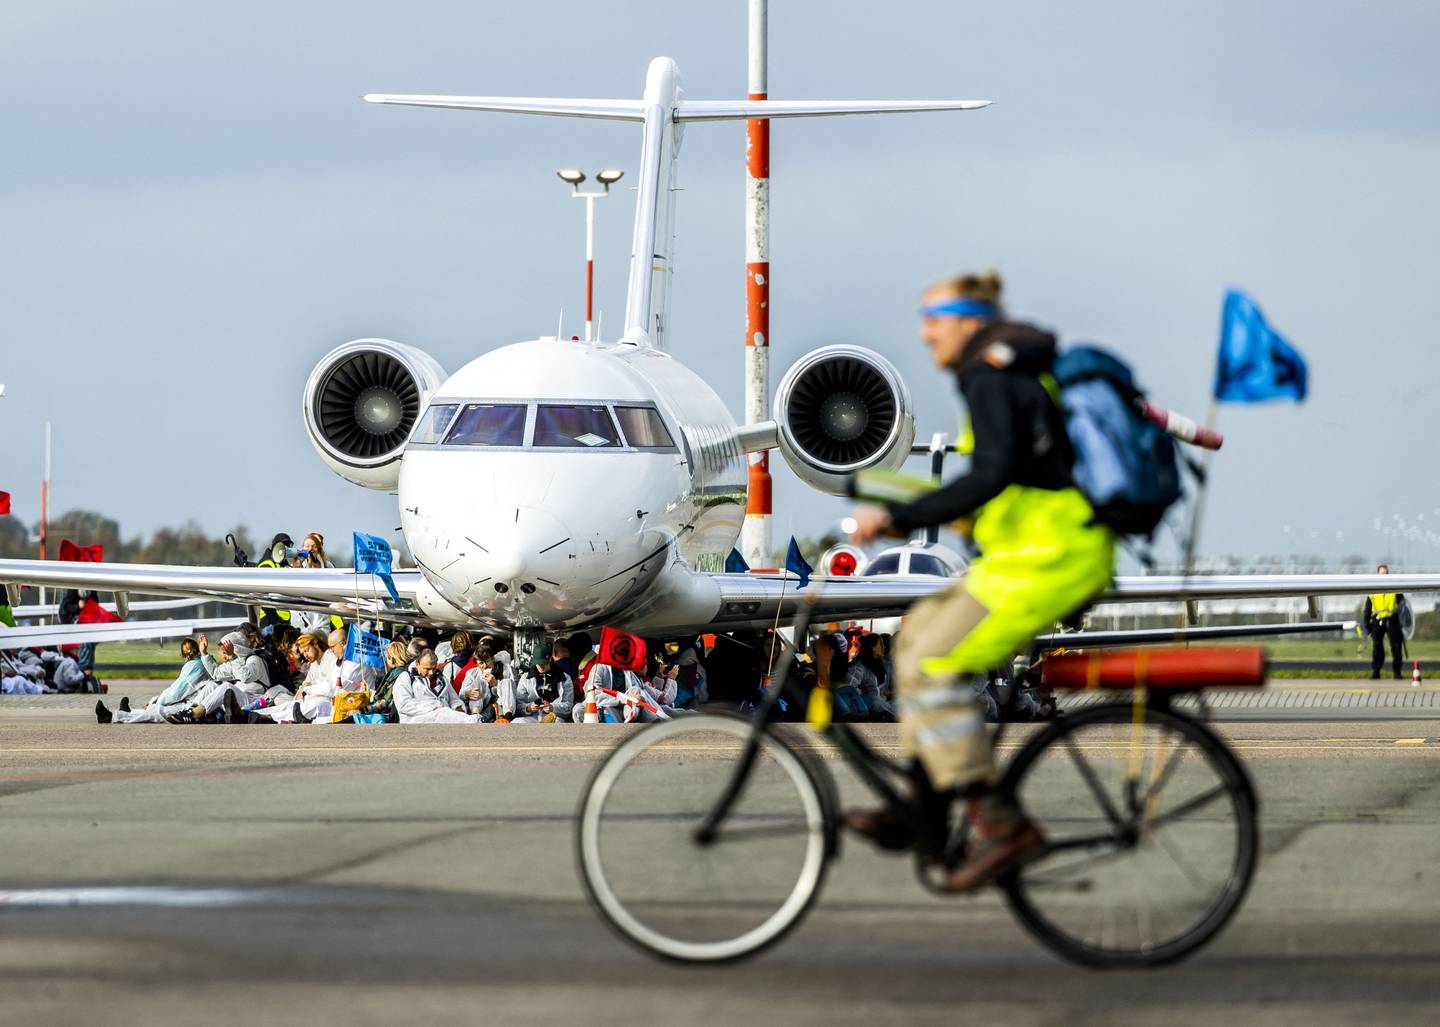 Extinction Rebellion, Greenpeace and other organisations' members cycle past and sit in front of aircraft during their protest. AFP